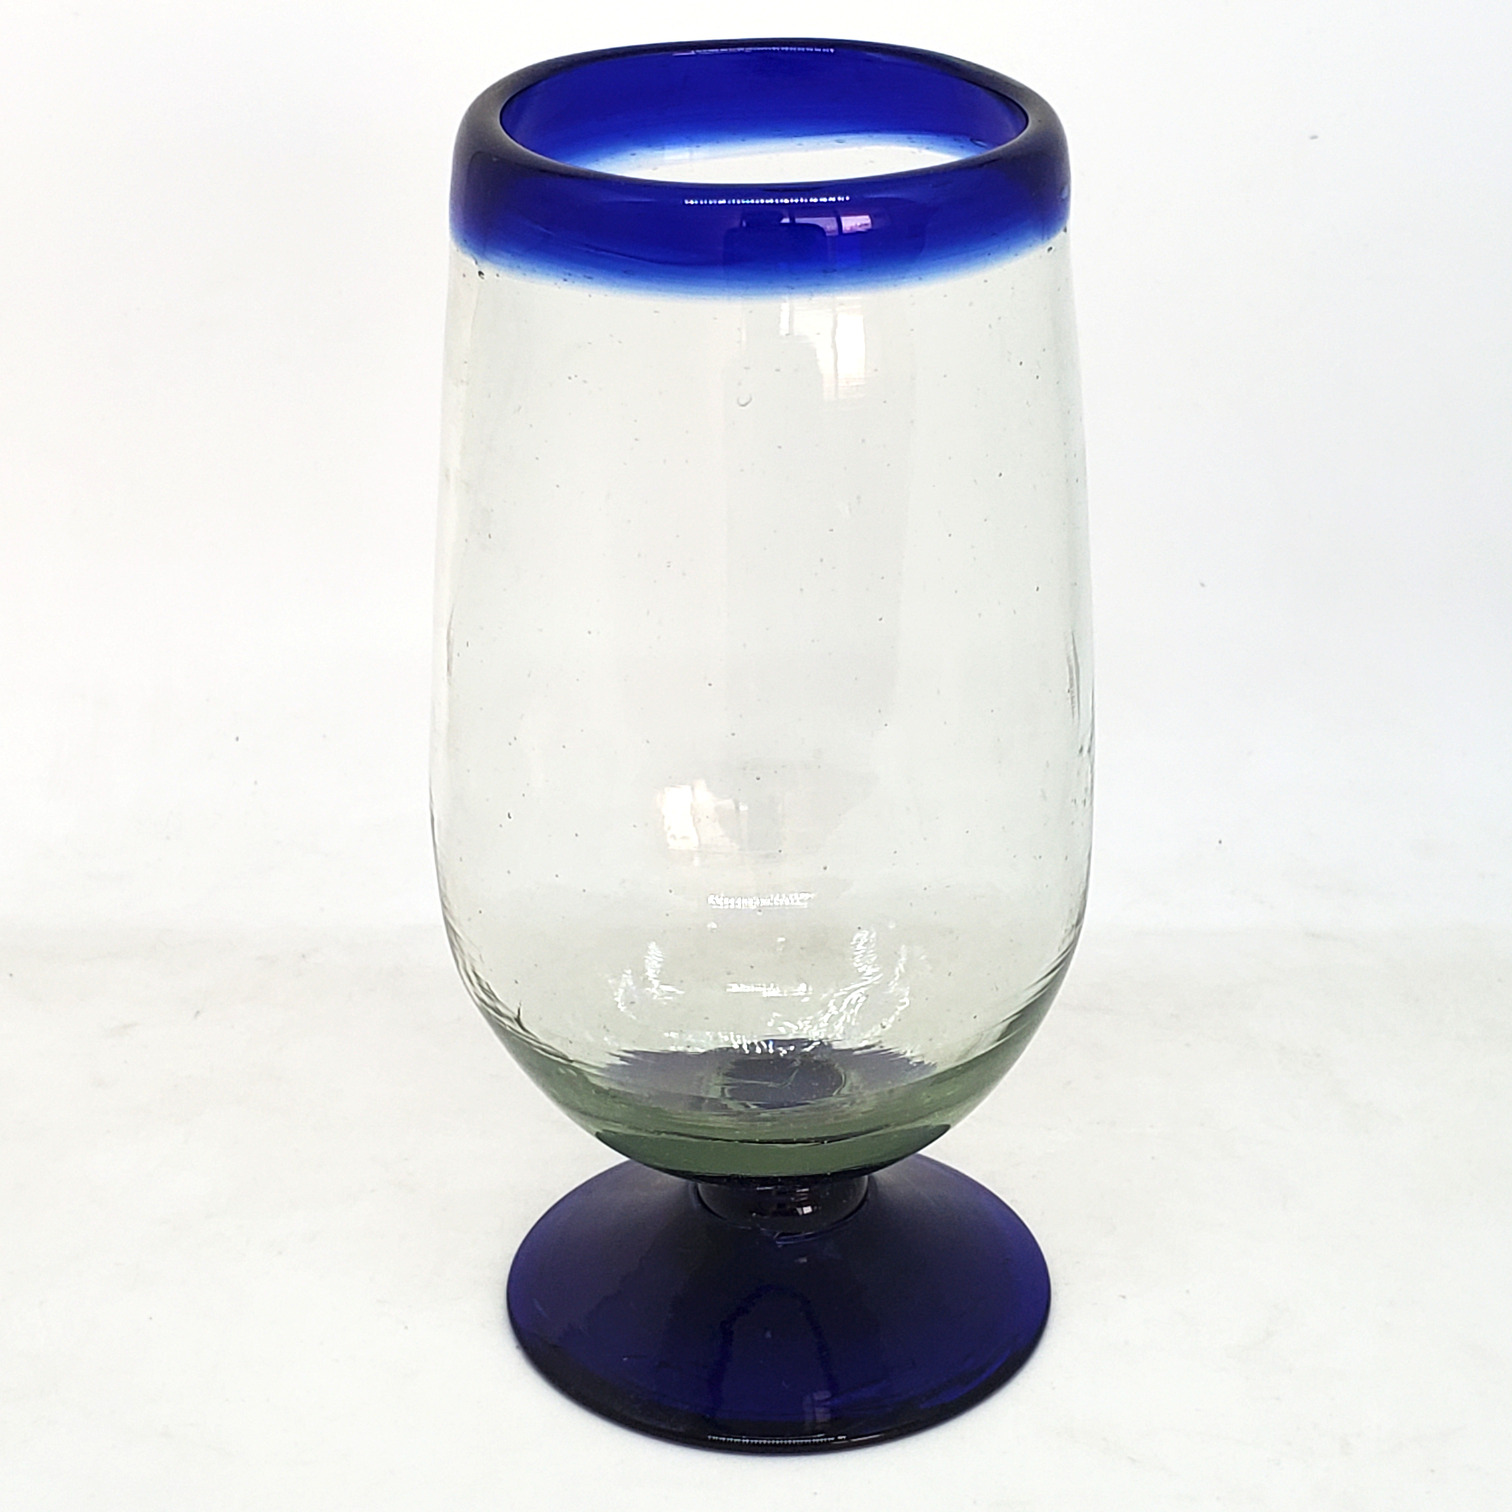 Colored Rim Glassware / Cobalt Blue Rim 17 oz Tall Water Goblets (set of 6) / These tall water goblets will embellish your table setting and give it a festive feel. Made from authentic hand blown recycled glass.